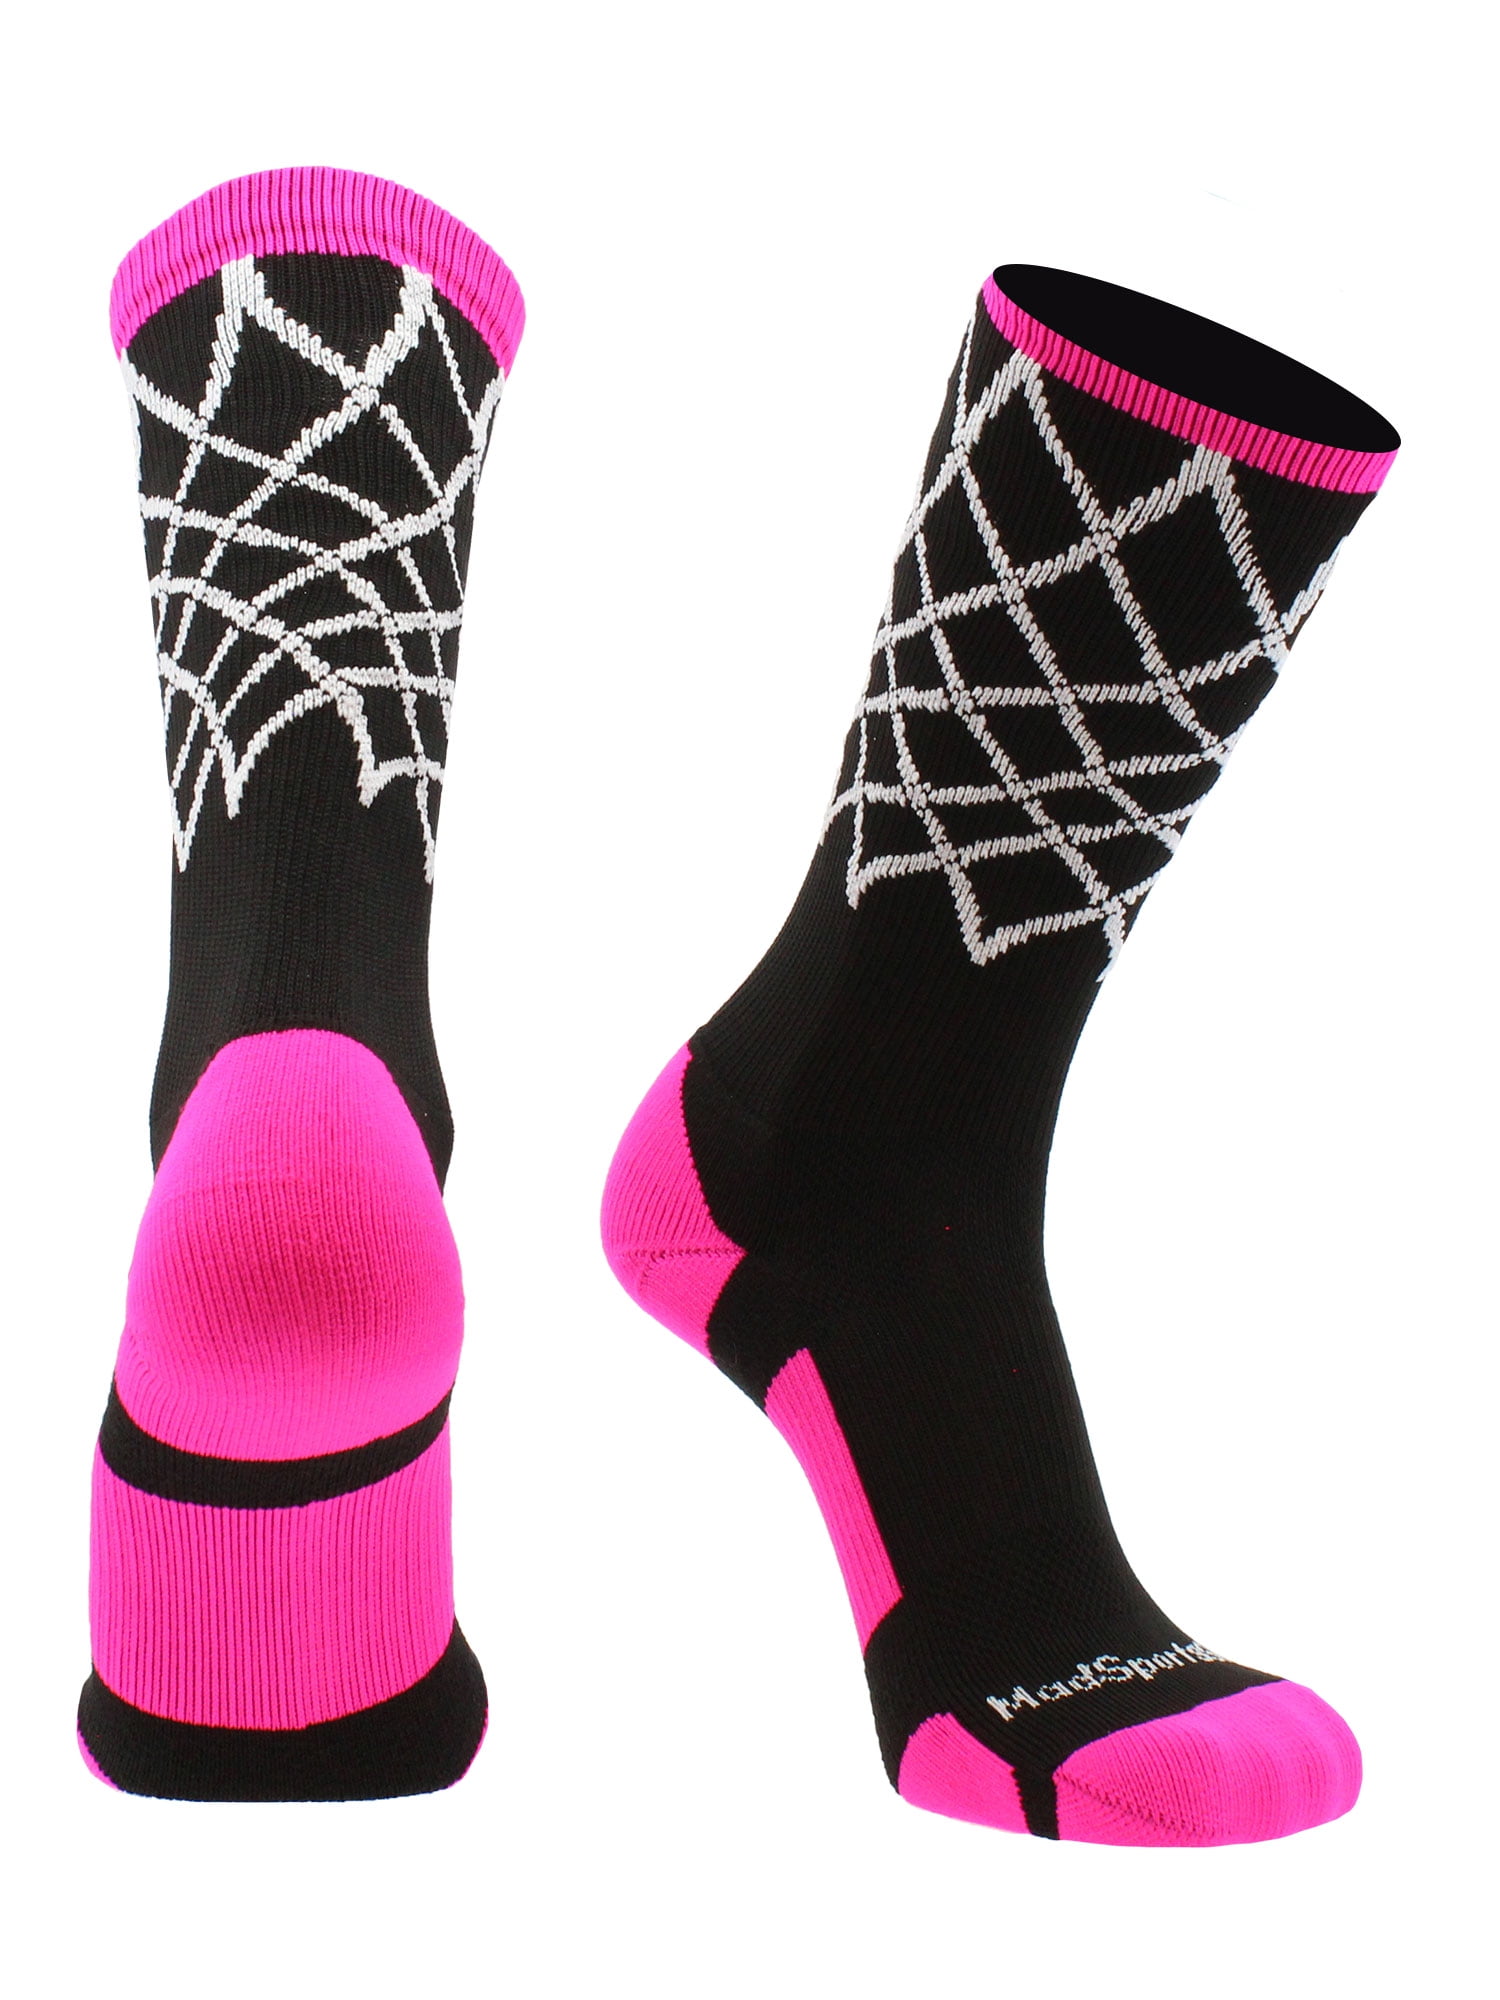 made in the USA MadSportsStuff Elite Basketball Socks with Net Crew length 